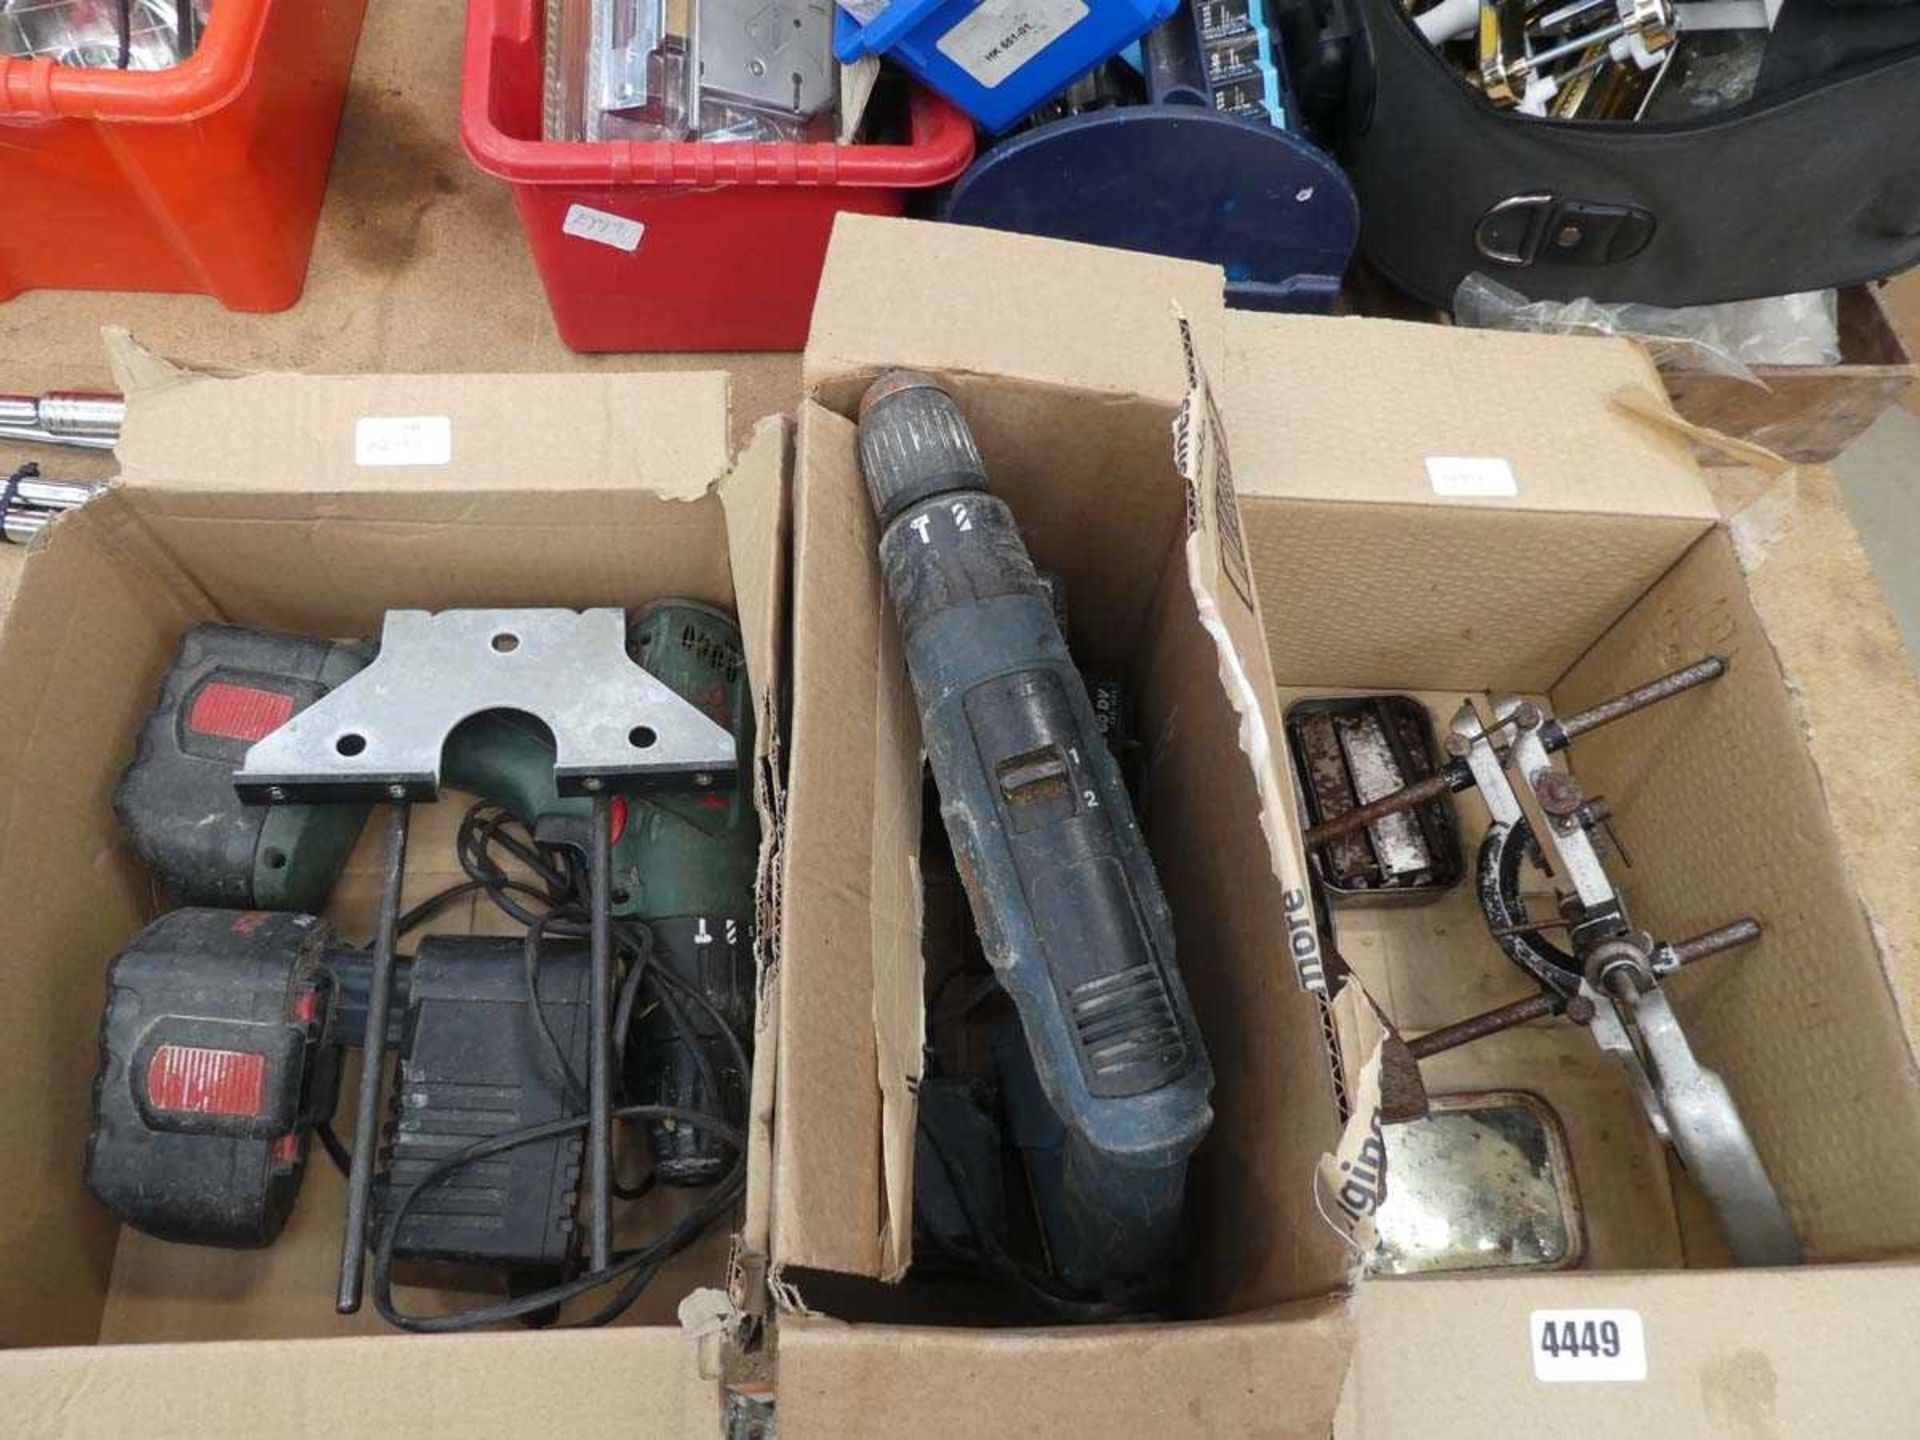 3 cardboard boxes containing 2 Bosch battery drills, small Stanley plane and 1 other